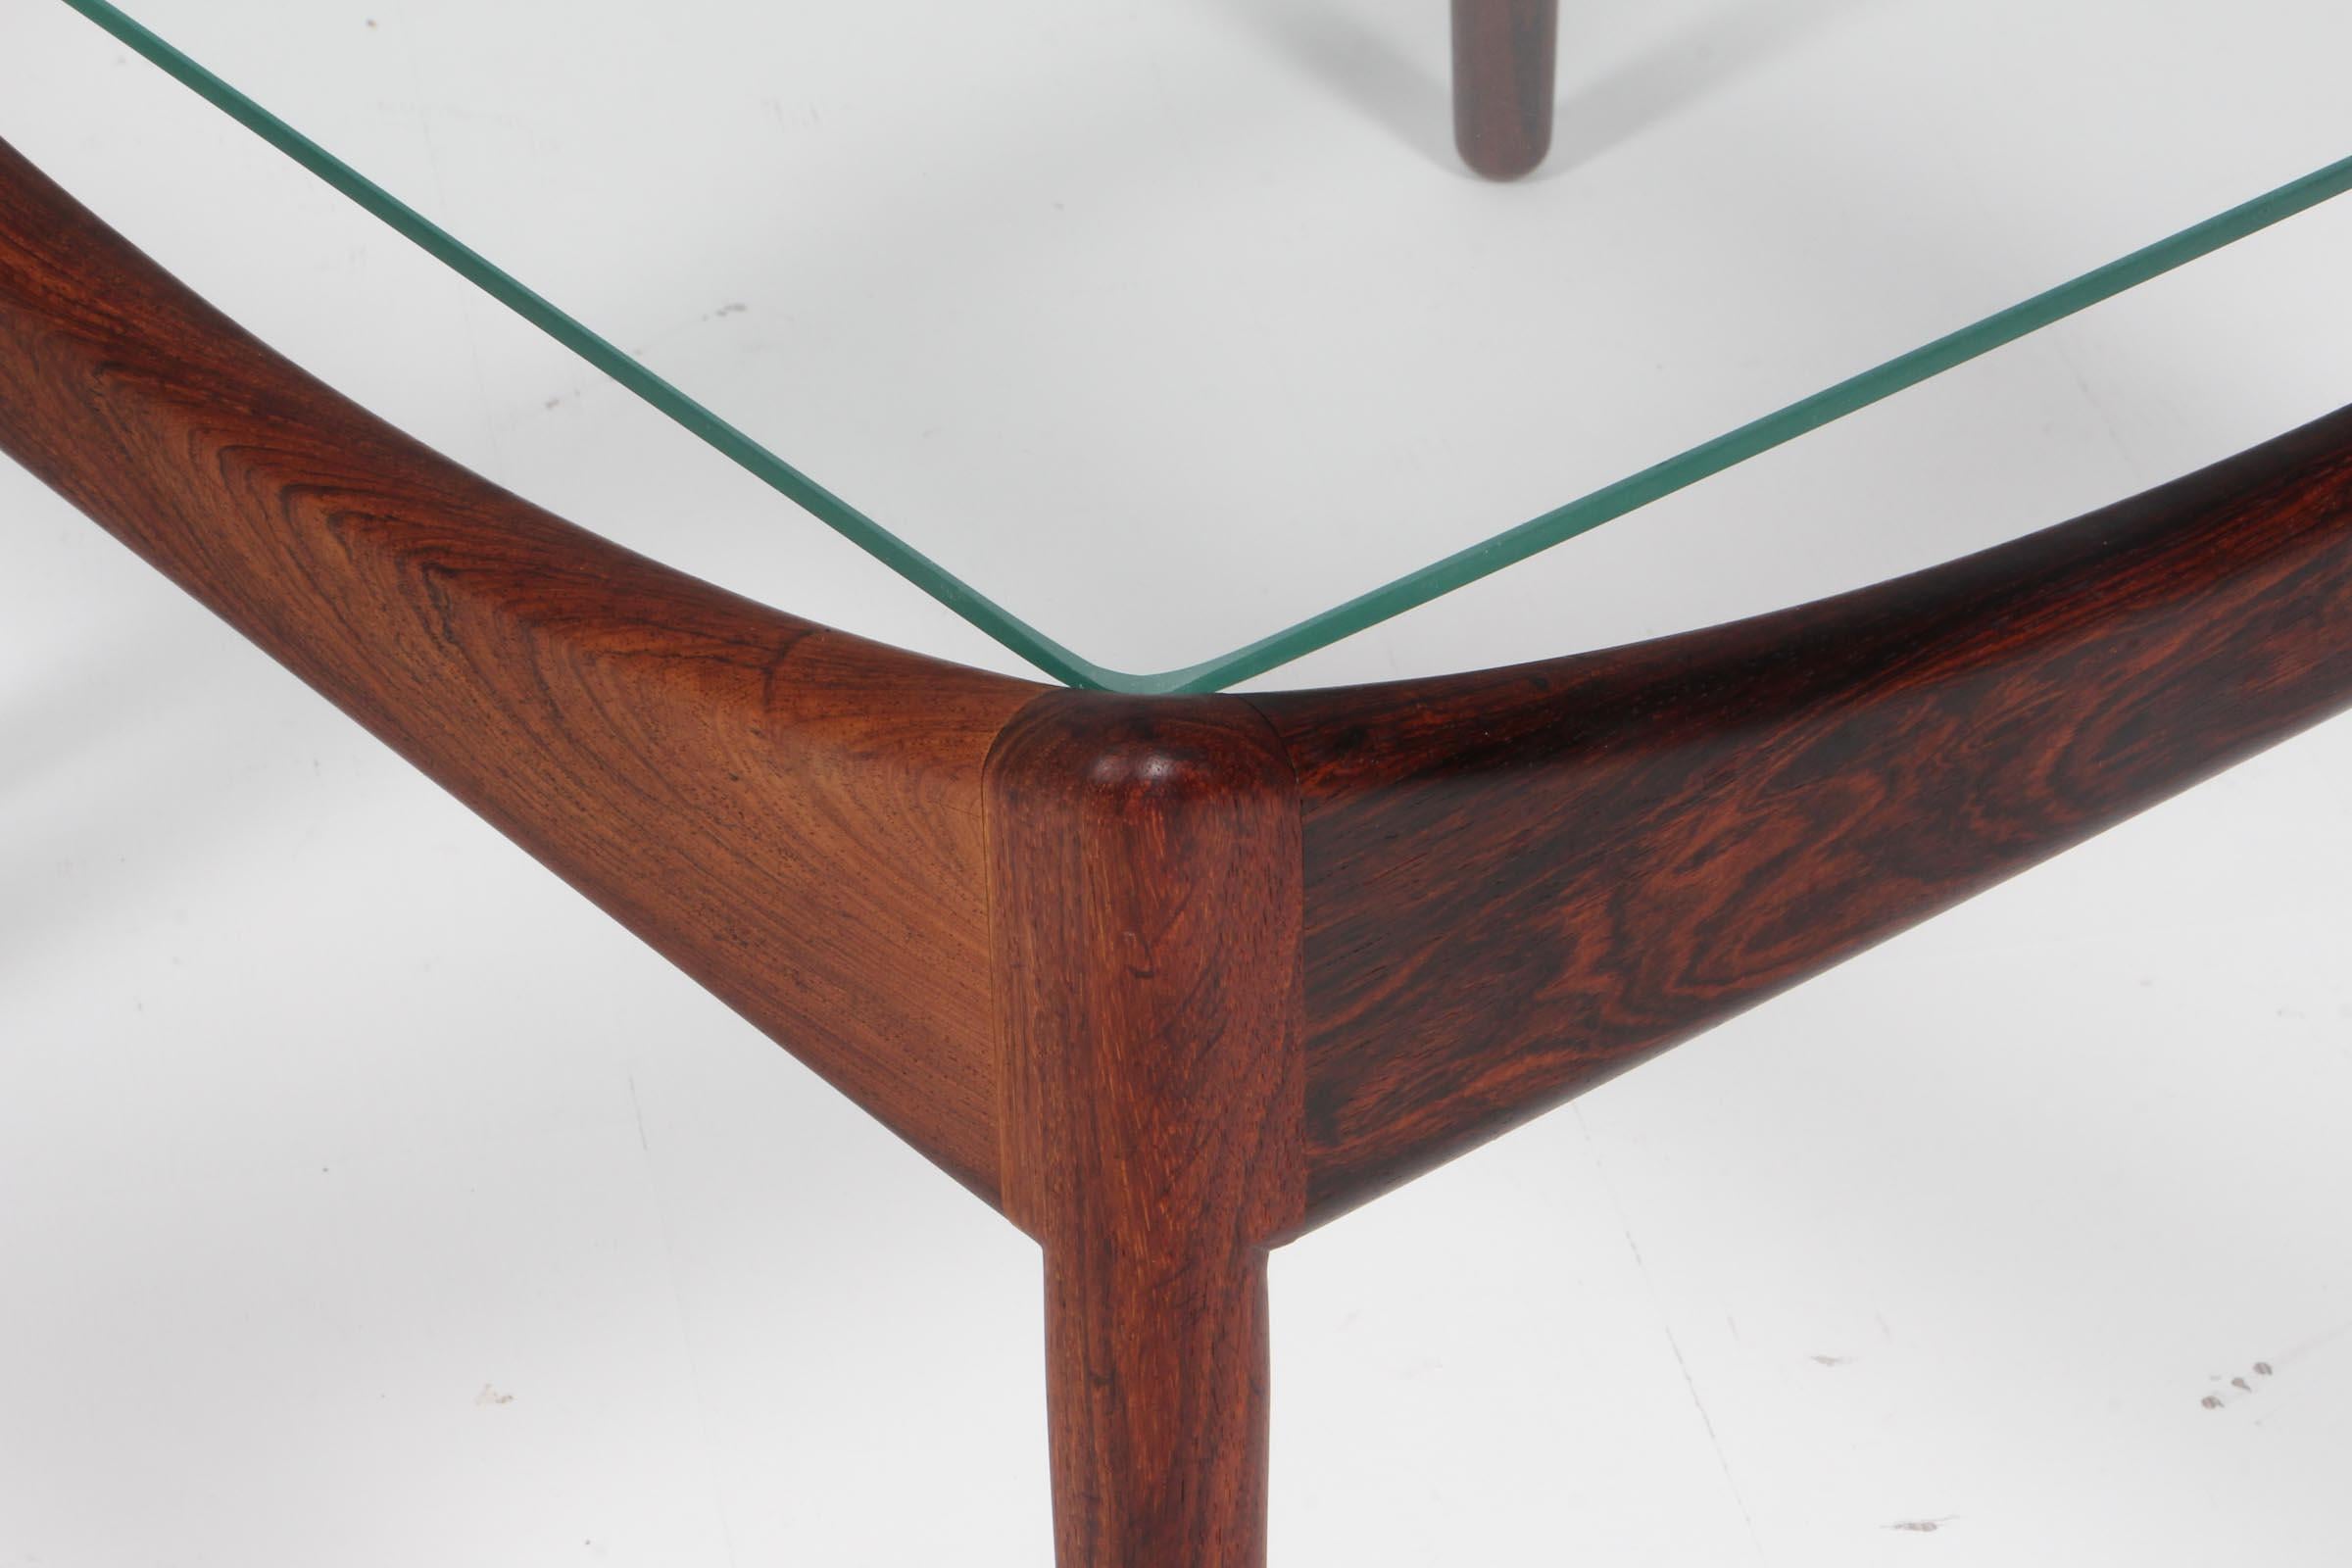 Scandinavian Modern Krisitan S. Vedel Coffee Table, Rosewood and glass, Denmark, 1960s For Sale